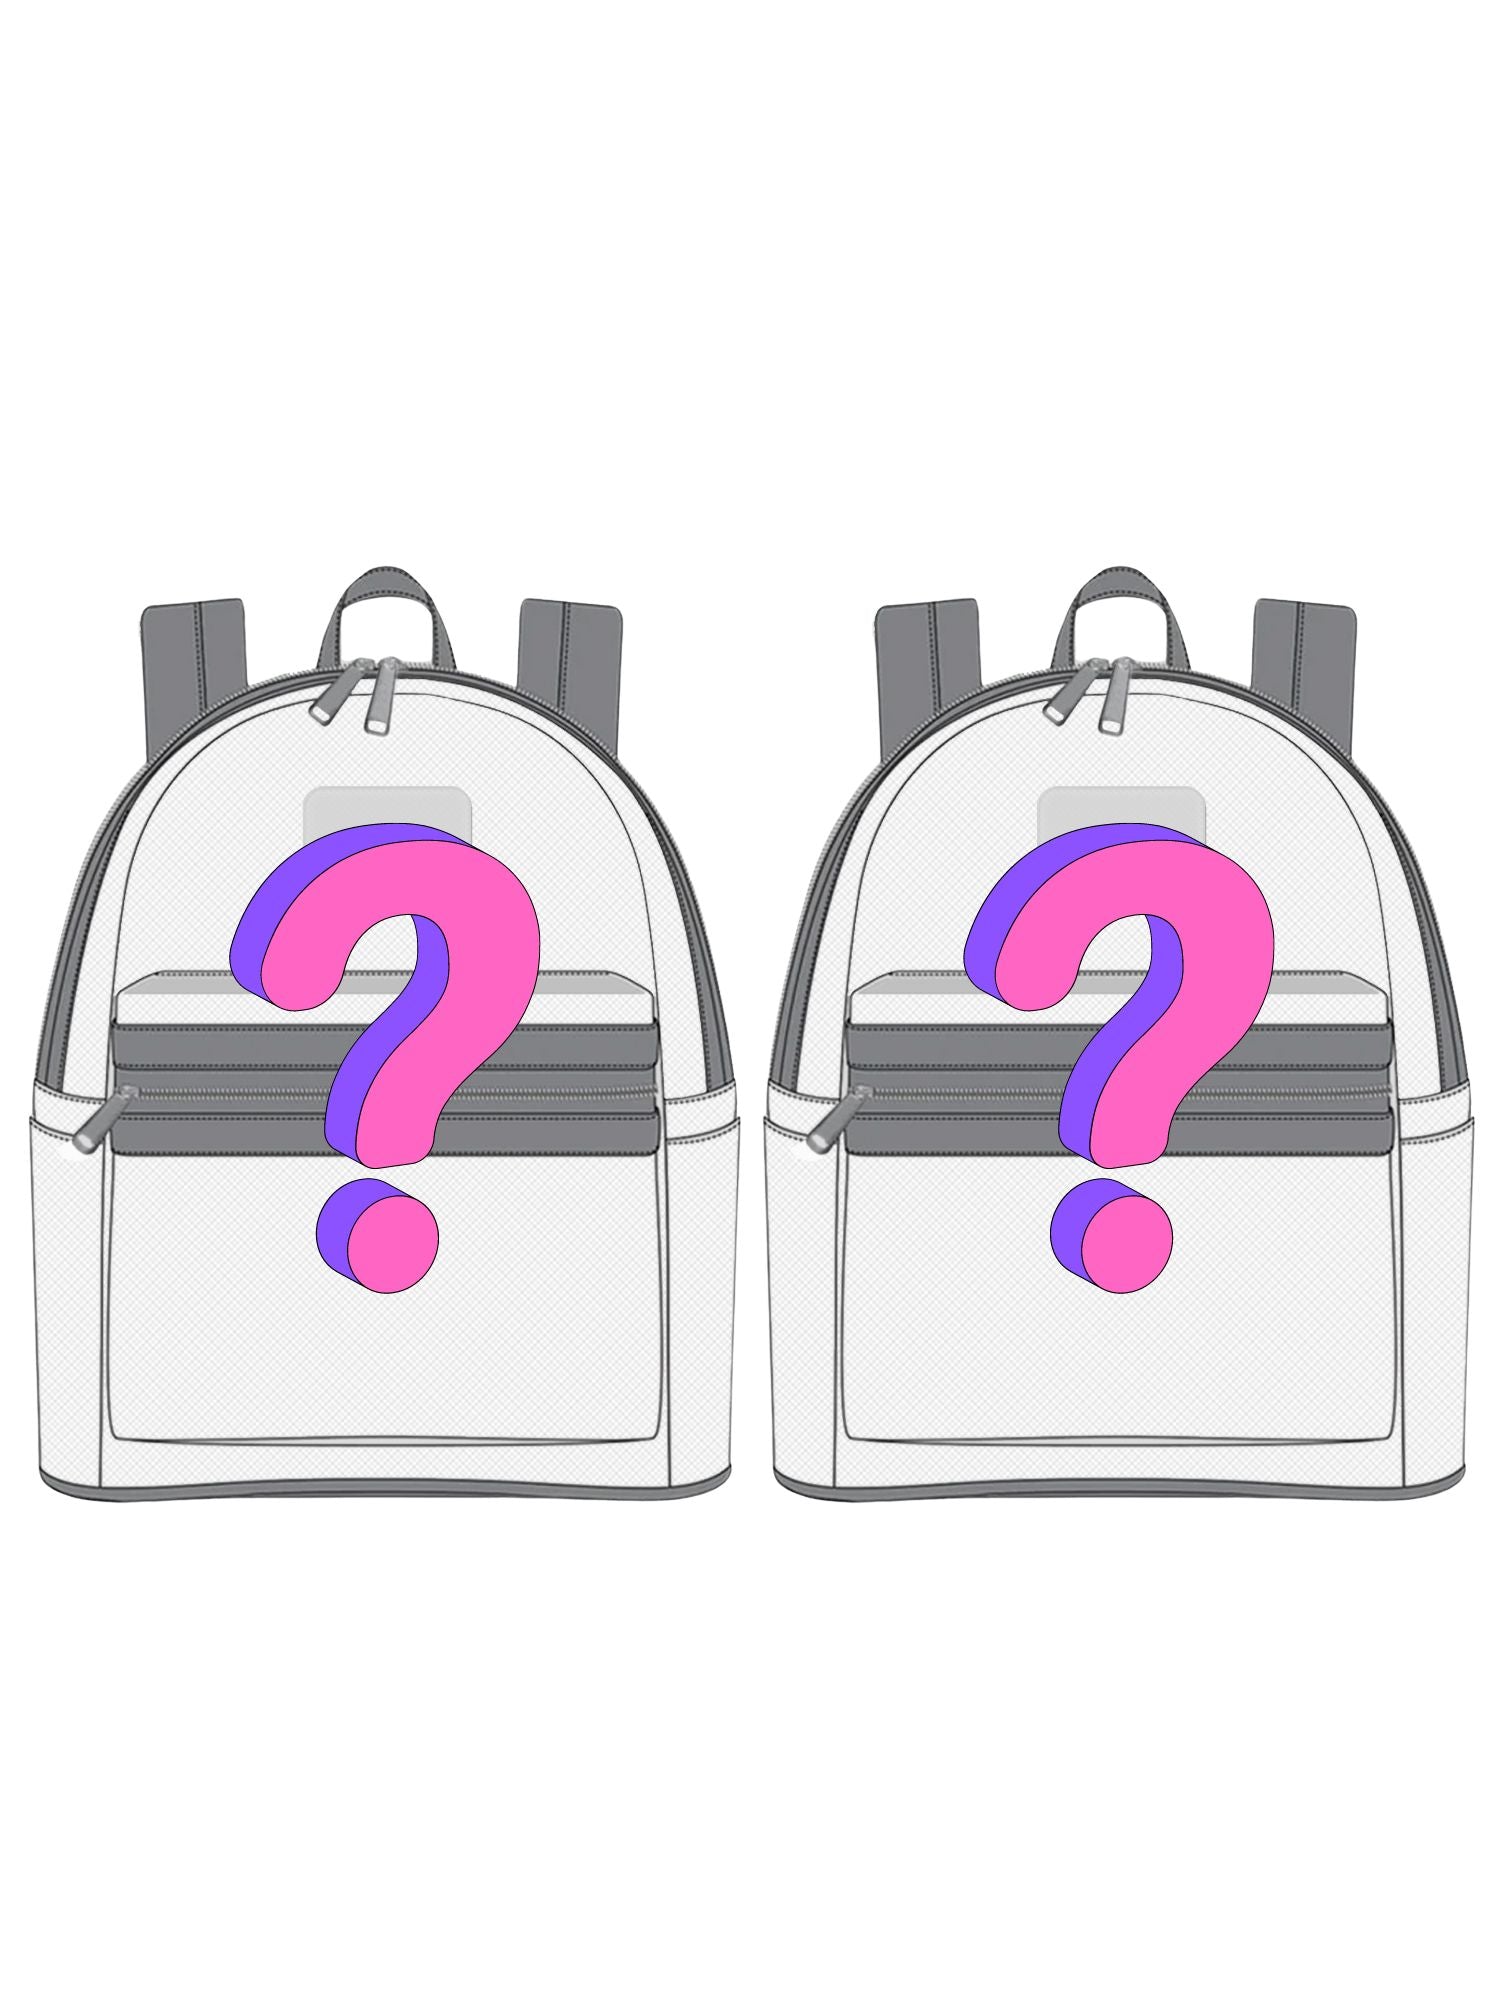 Loungefly Mystery Mini Backpack (2 Bags)